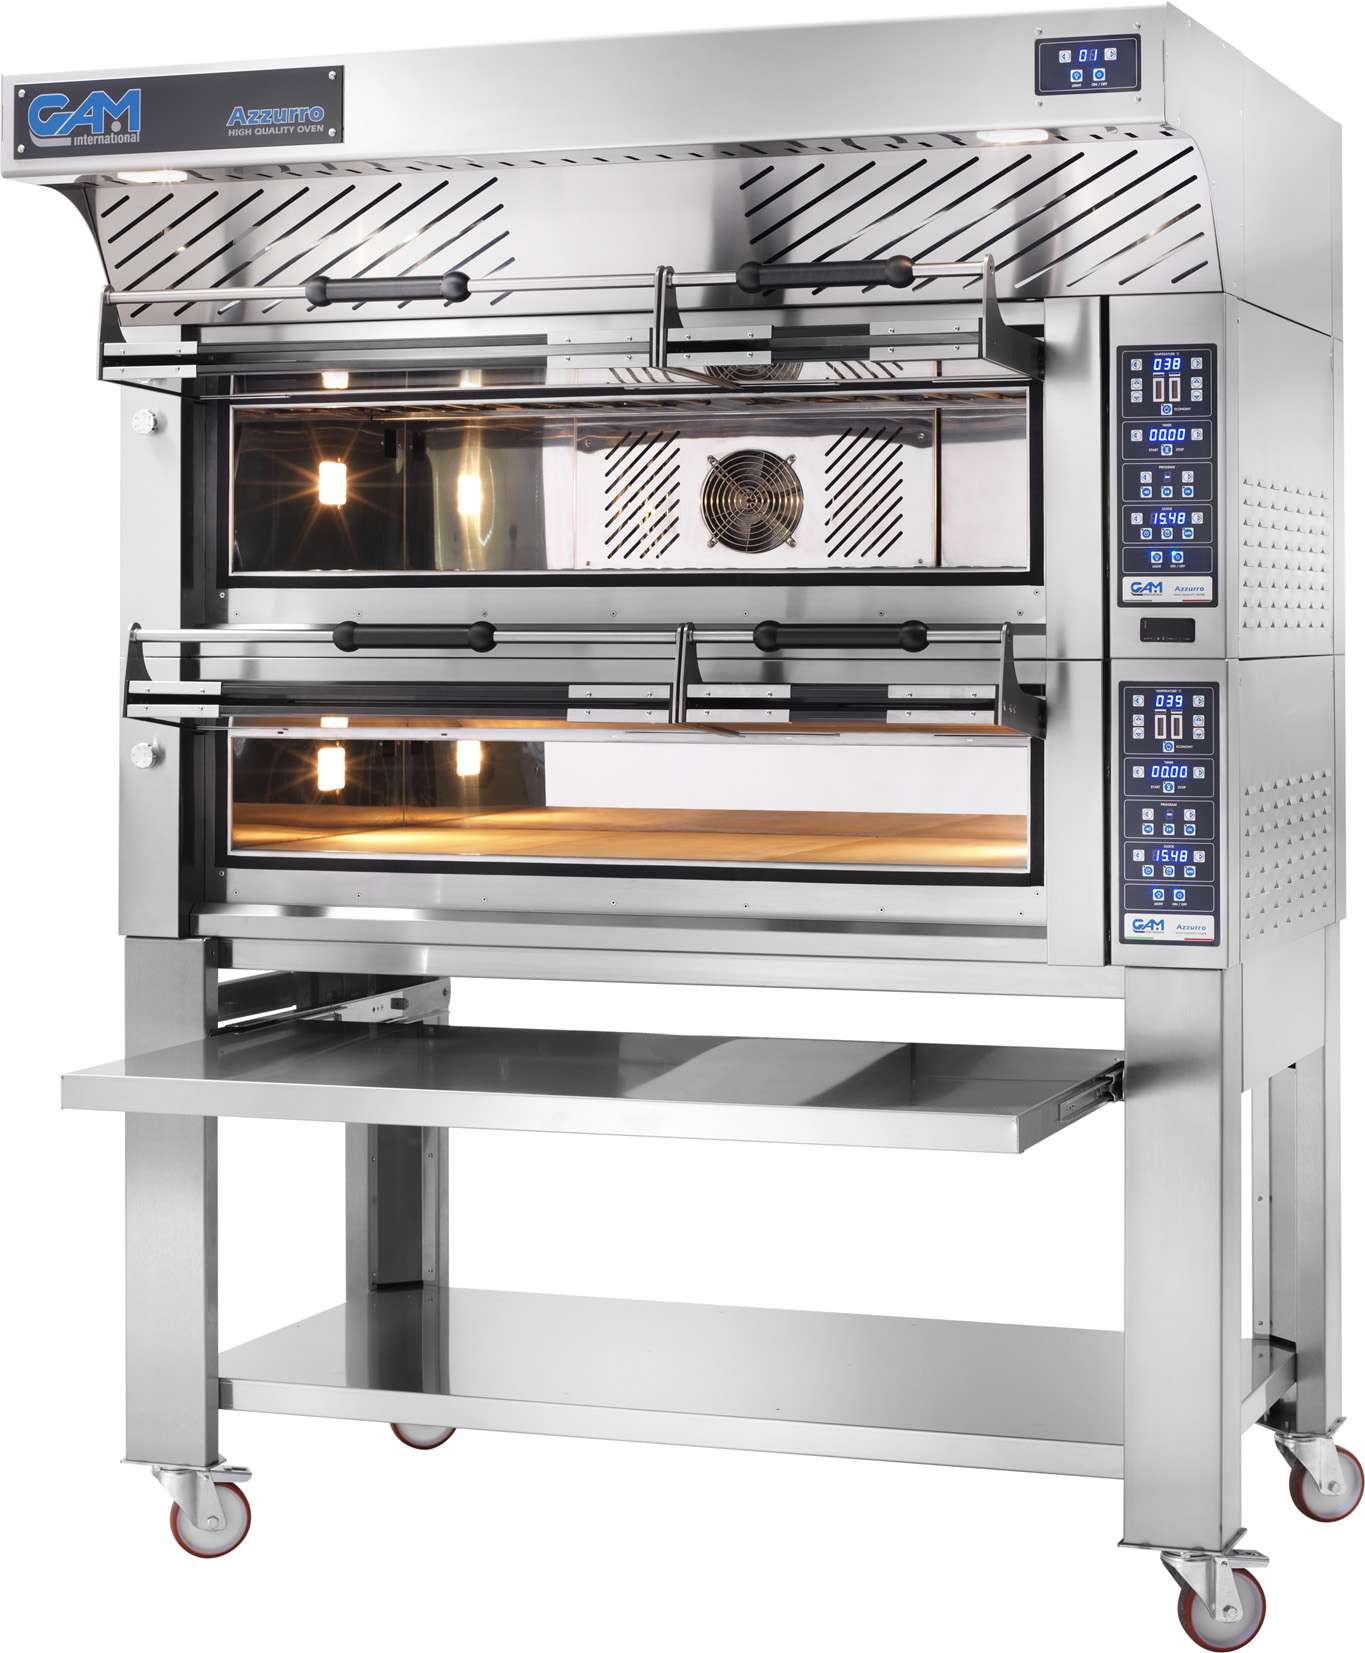 AZZURRO Bakery 2 Tray Stone Deck Oven with Dual Static/Fan Forced Technology